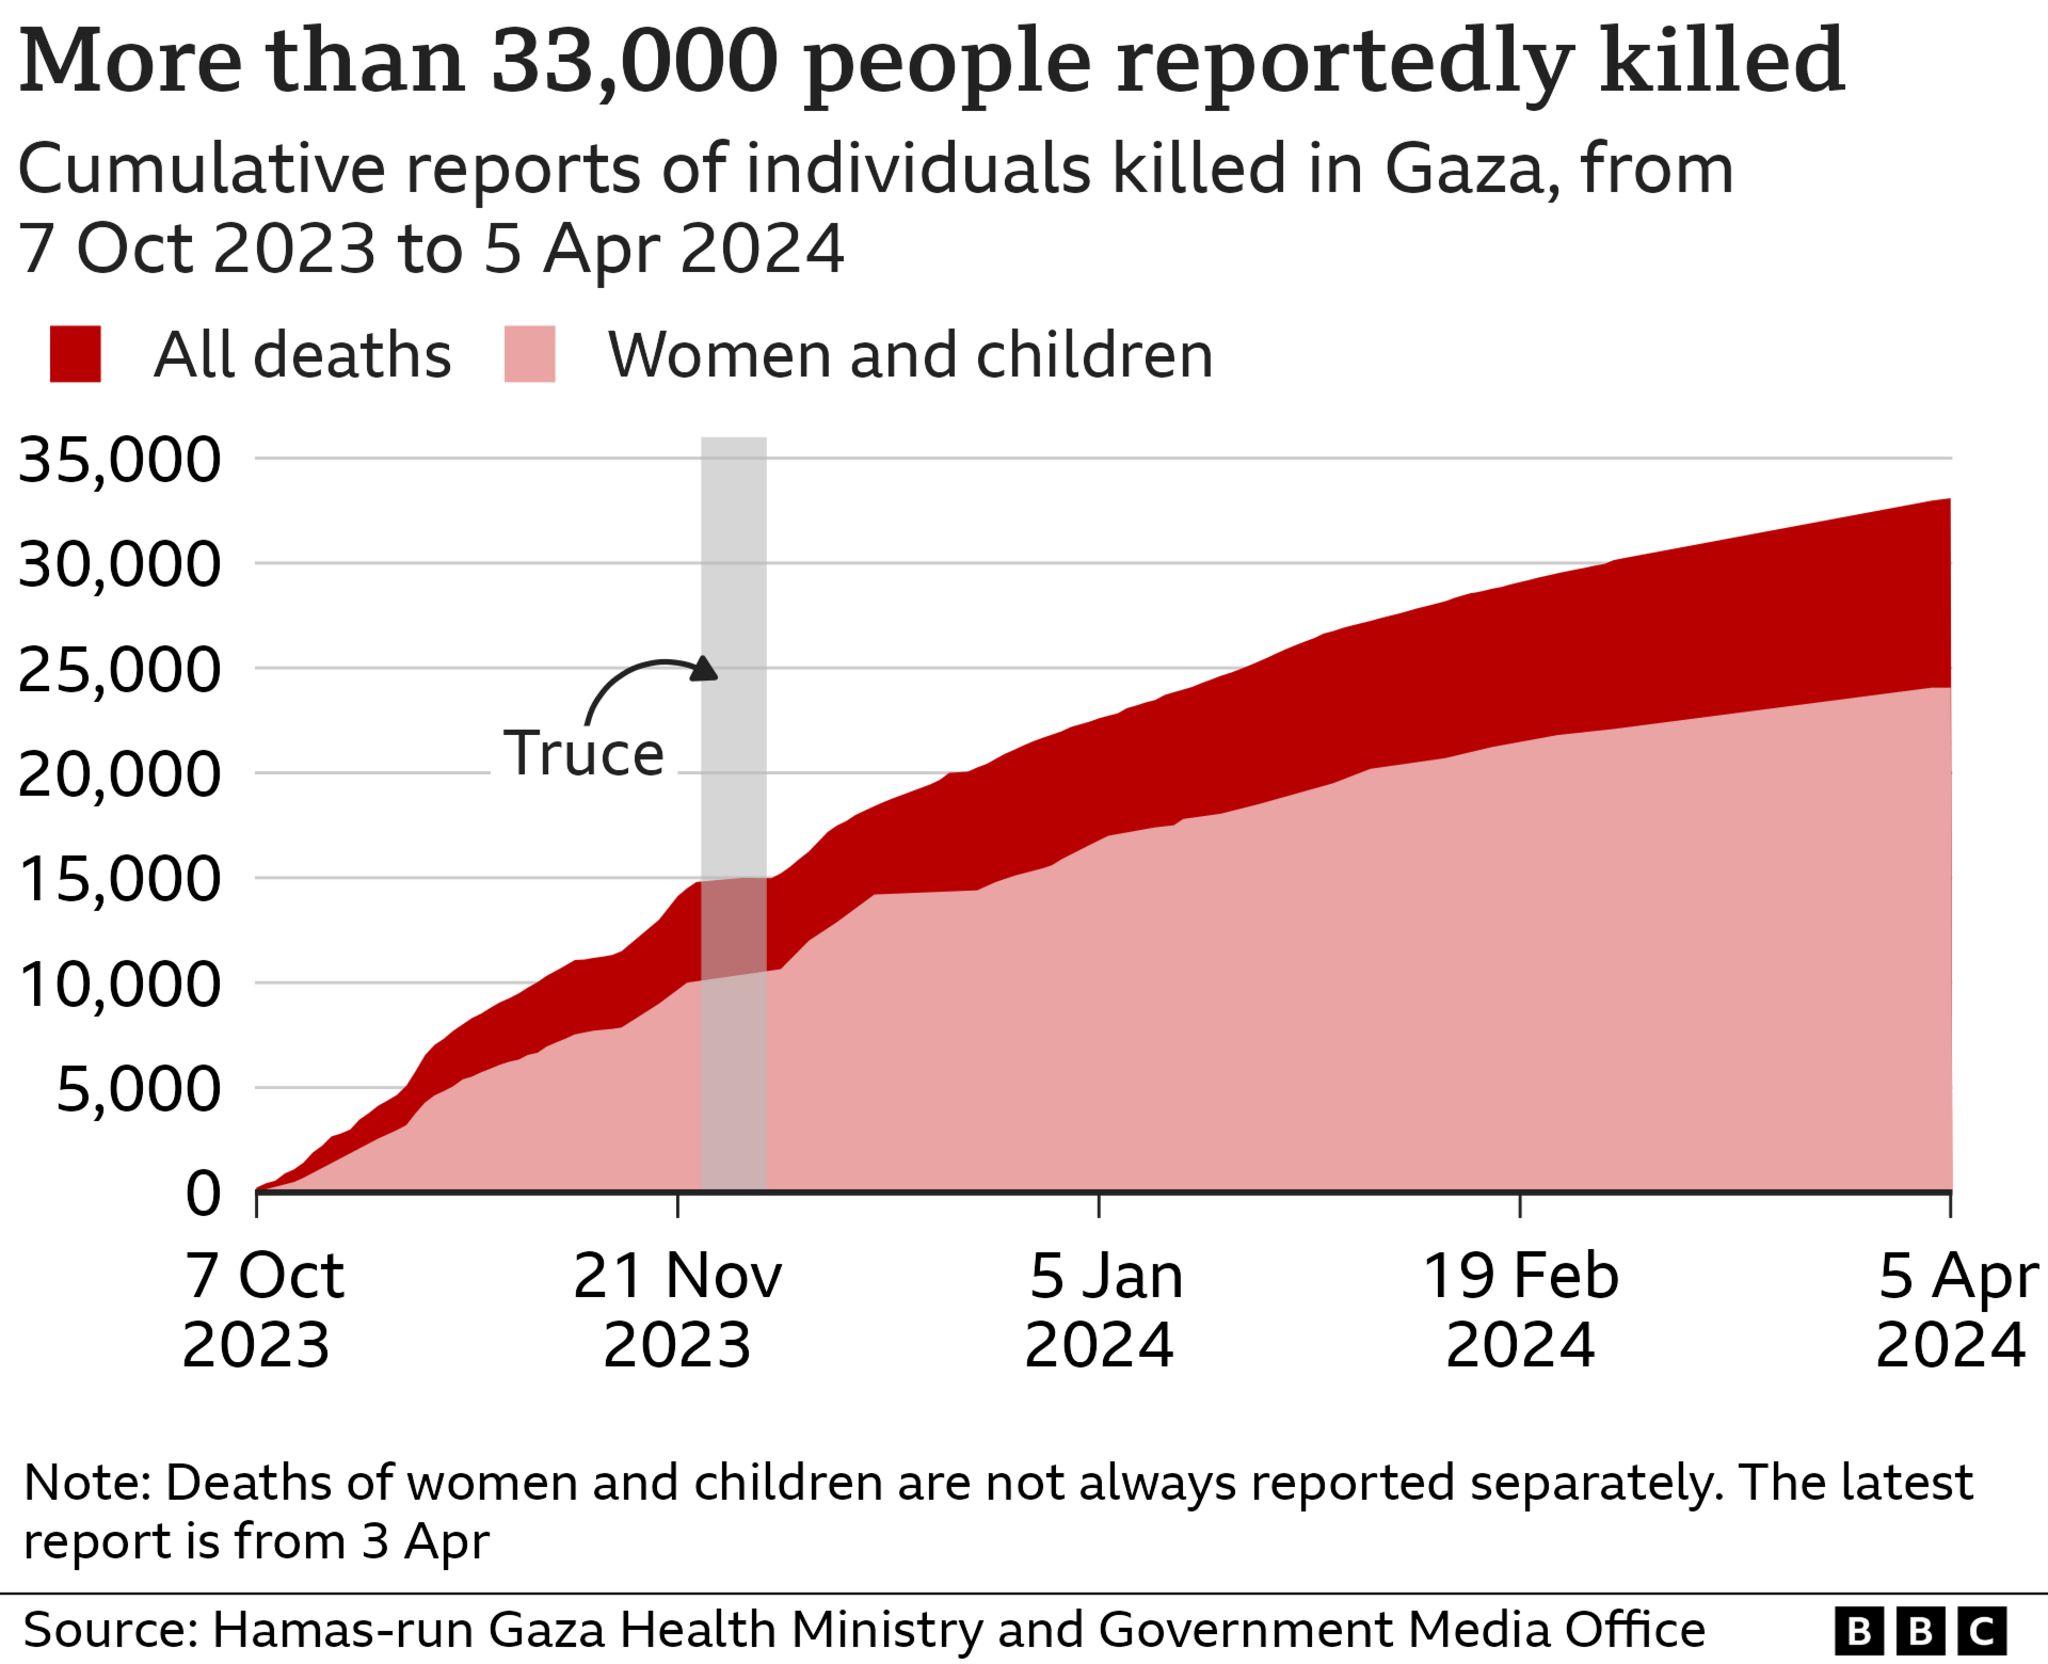 Chart showing death toll of Palestinians in Gaza